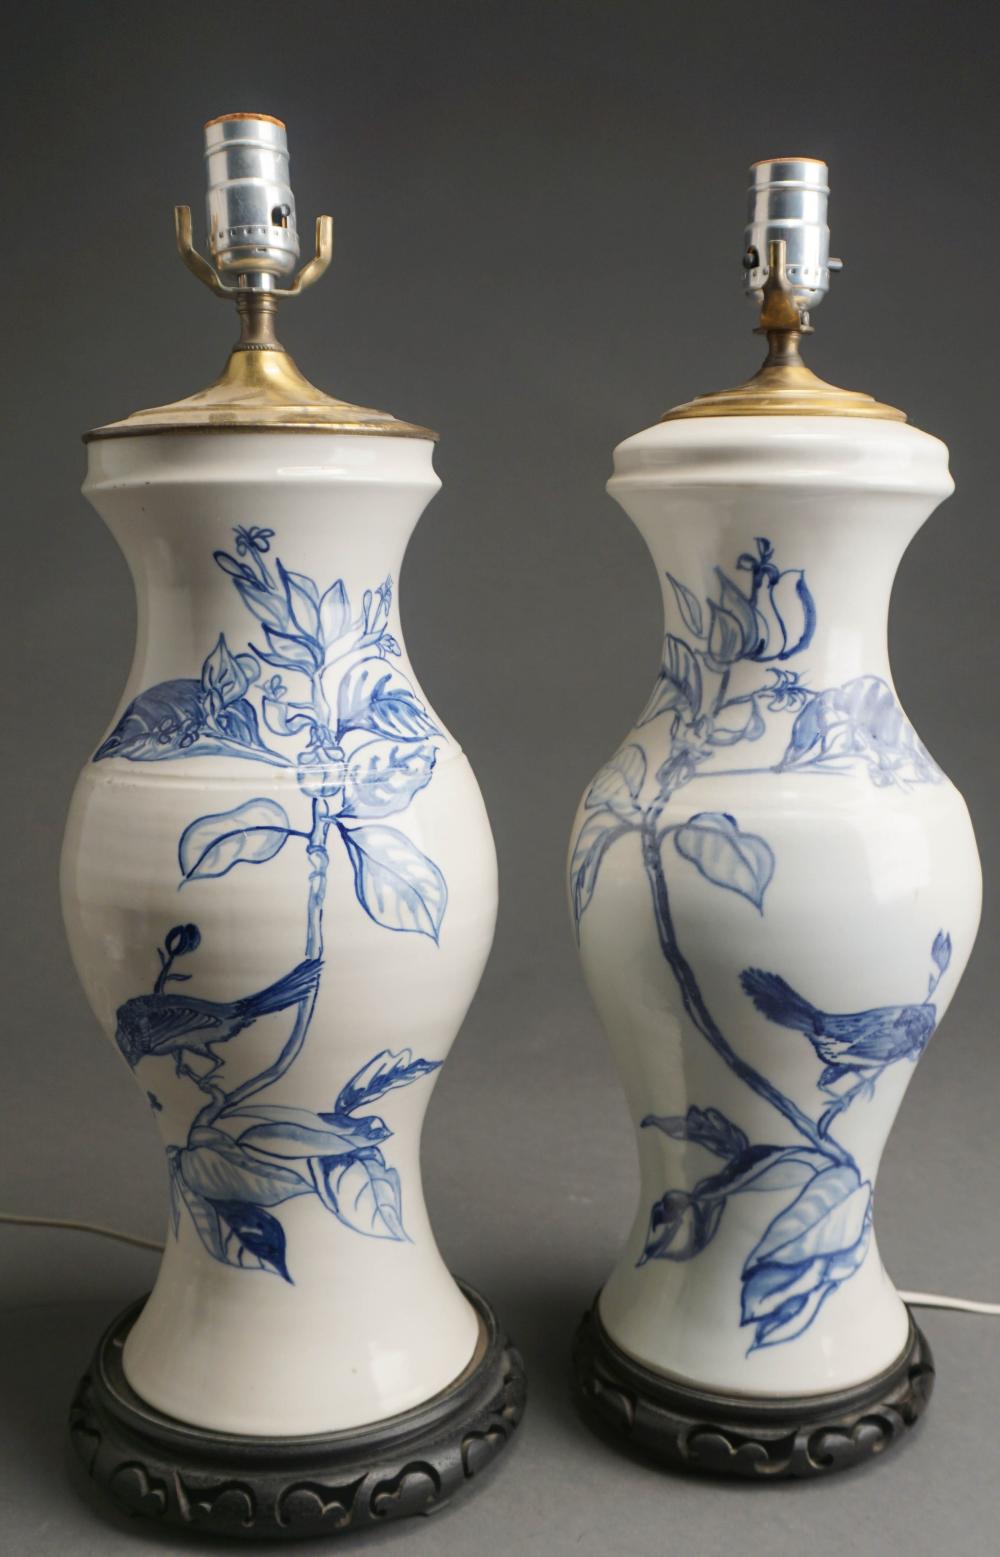 PAIR OF ASIAN BLUE AND WHITE PORCELAIN